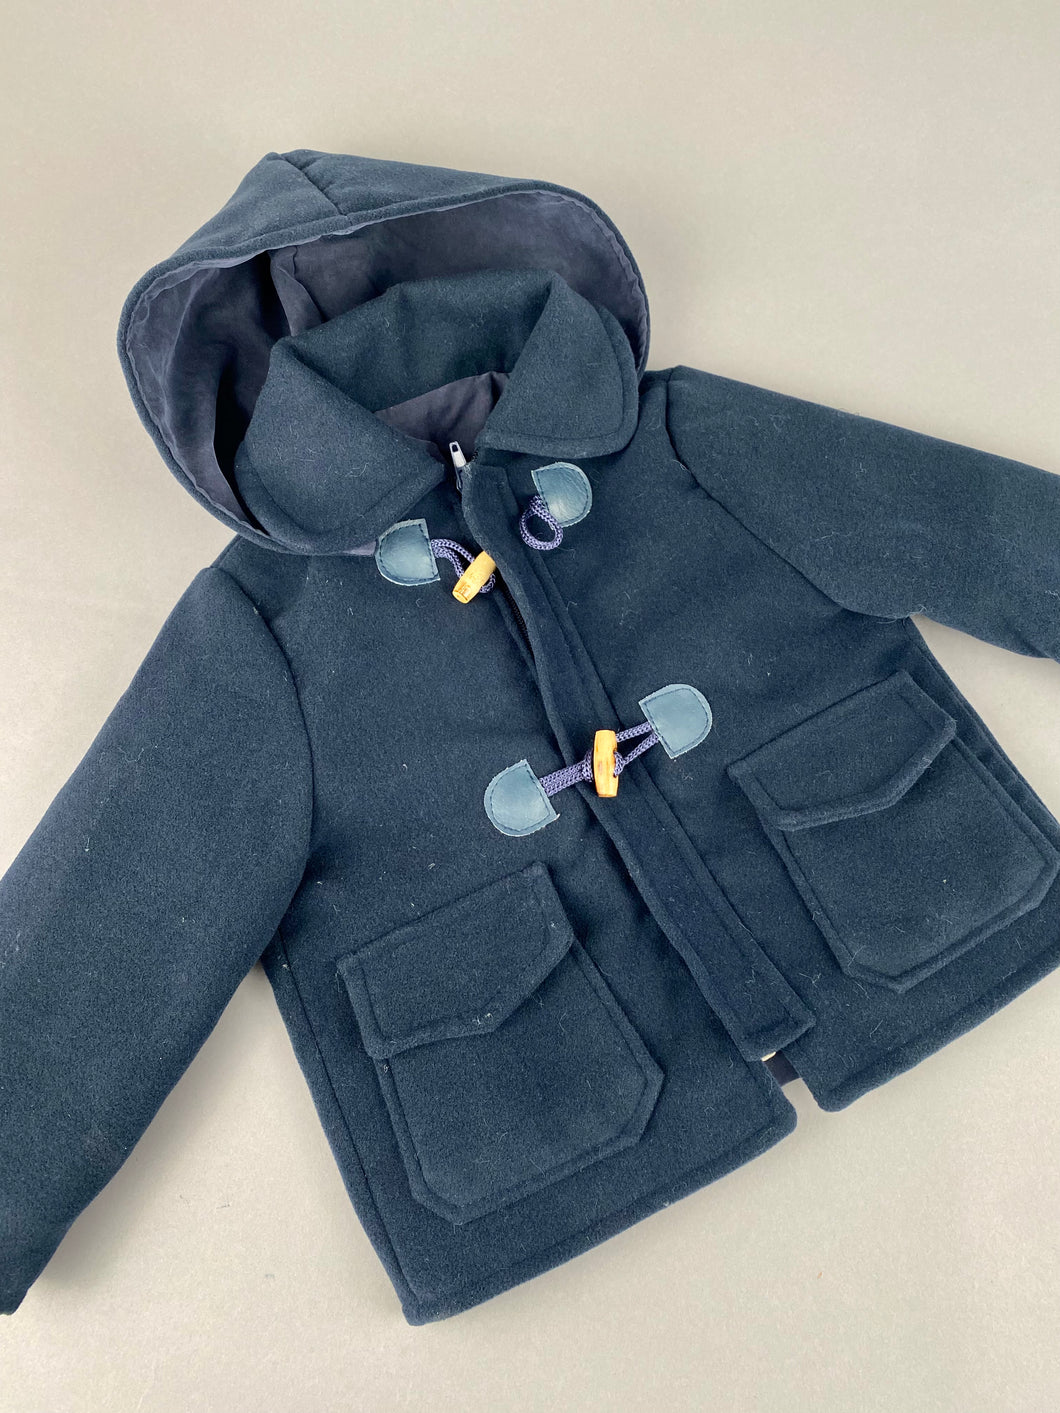 Navy Blue Cashmere Blend Coat with Zipper, Wooden Buckles and Removable Hoodie  BC1